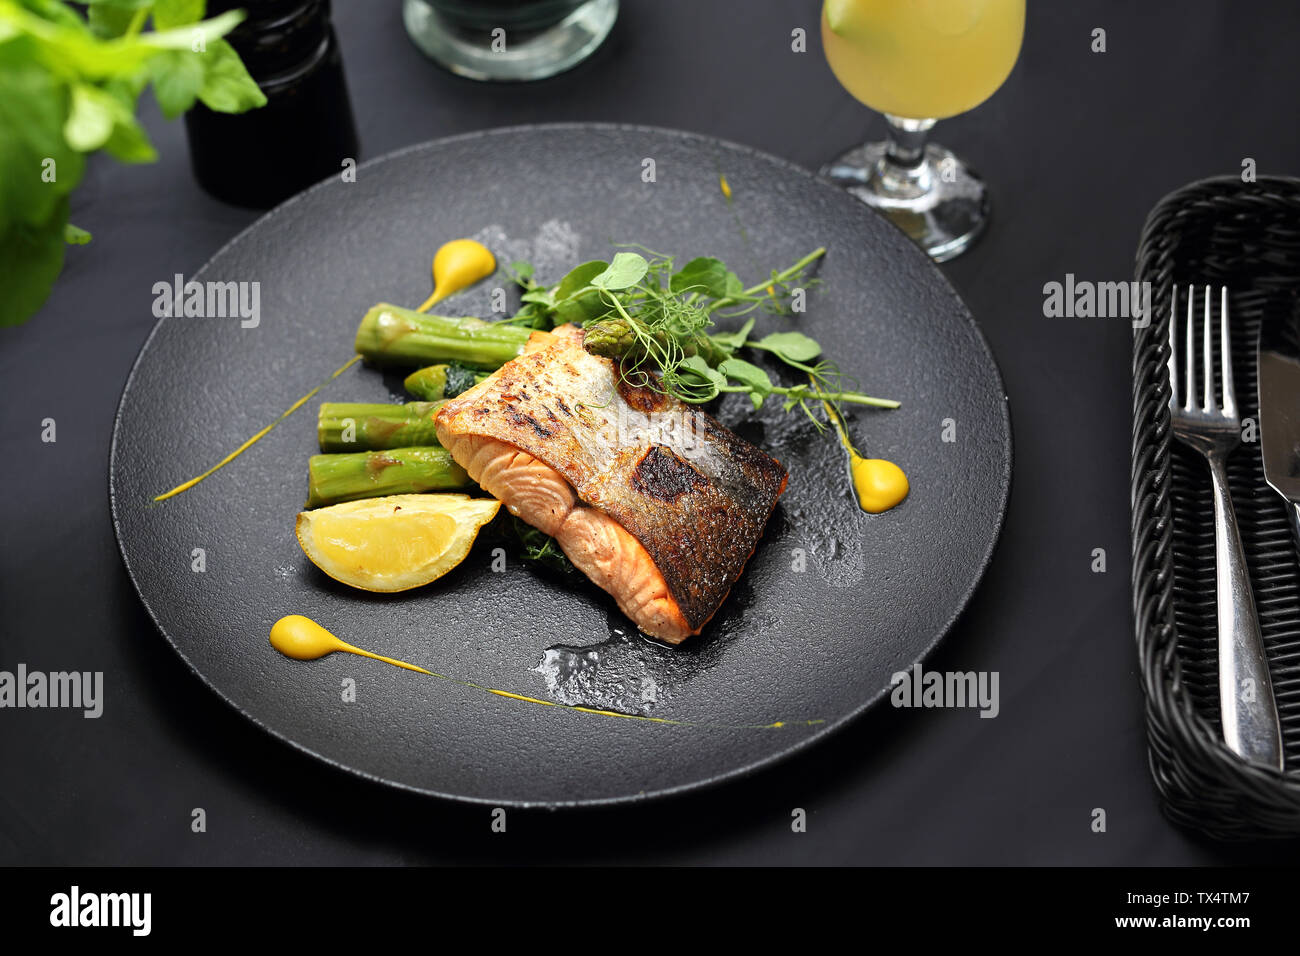 Grilled salmon on green asparagus. An elegant exquisite dish. Stock Photo